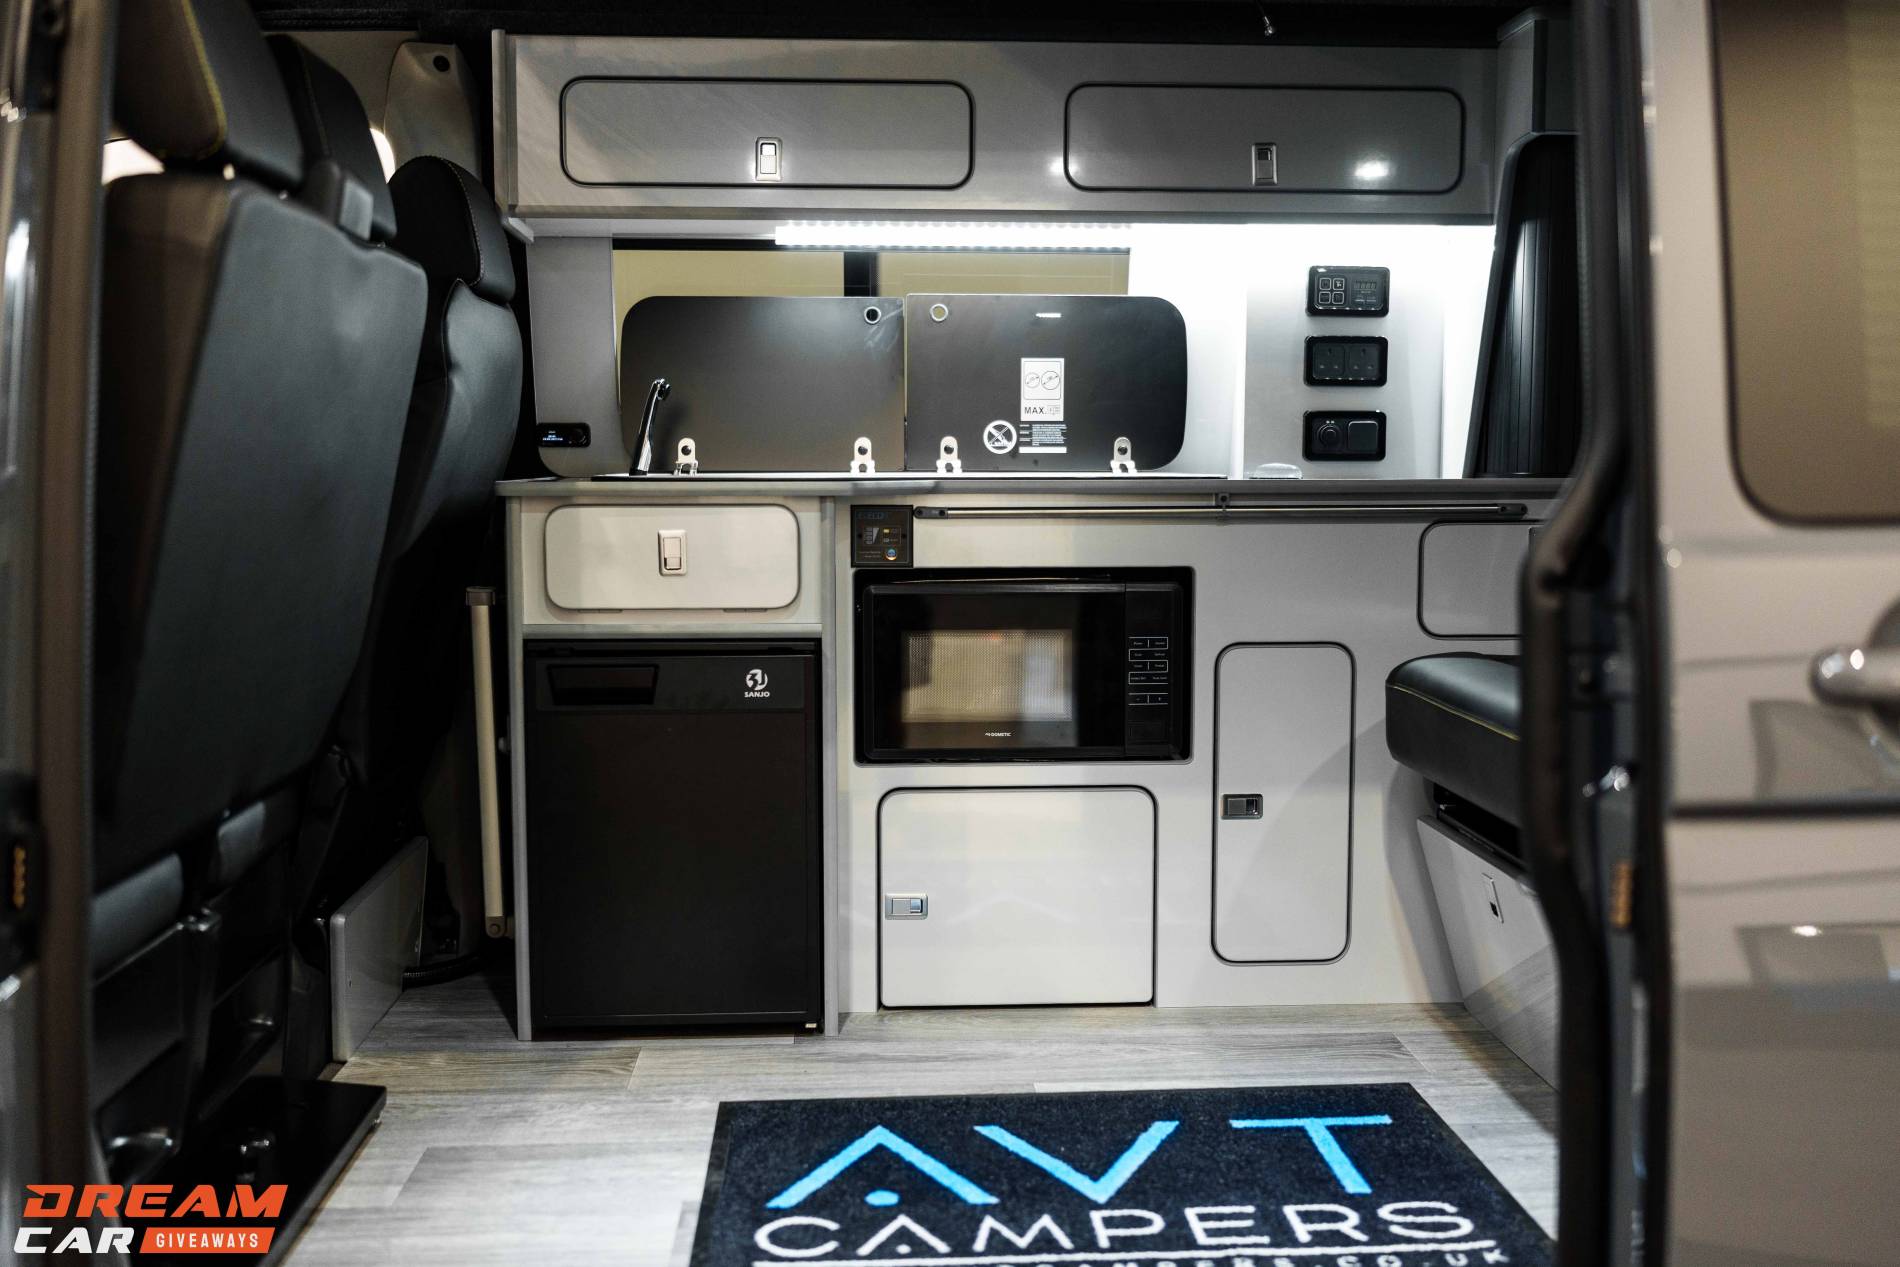 Win this 2023 AVT Transporter T6.1 Camper & £1,000 or £53,000 Tax Free